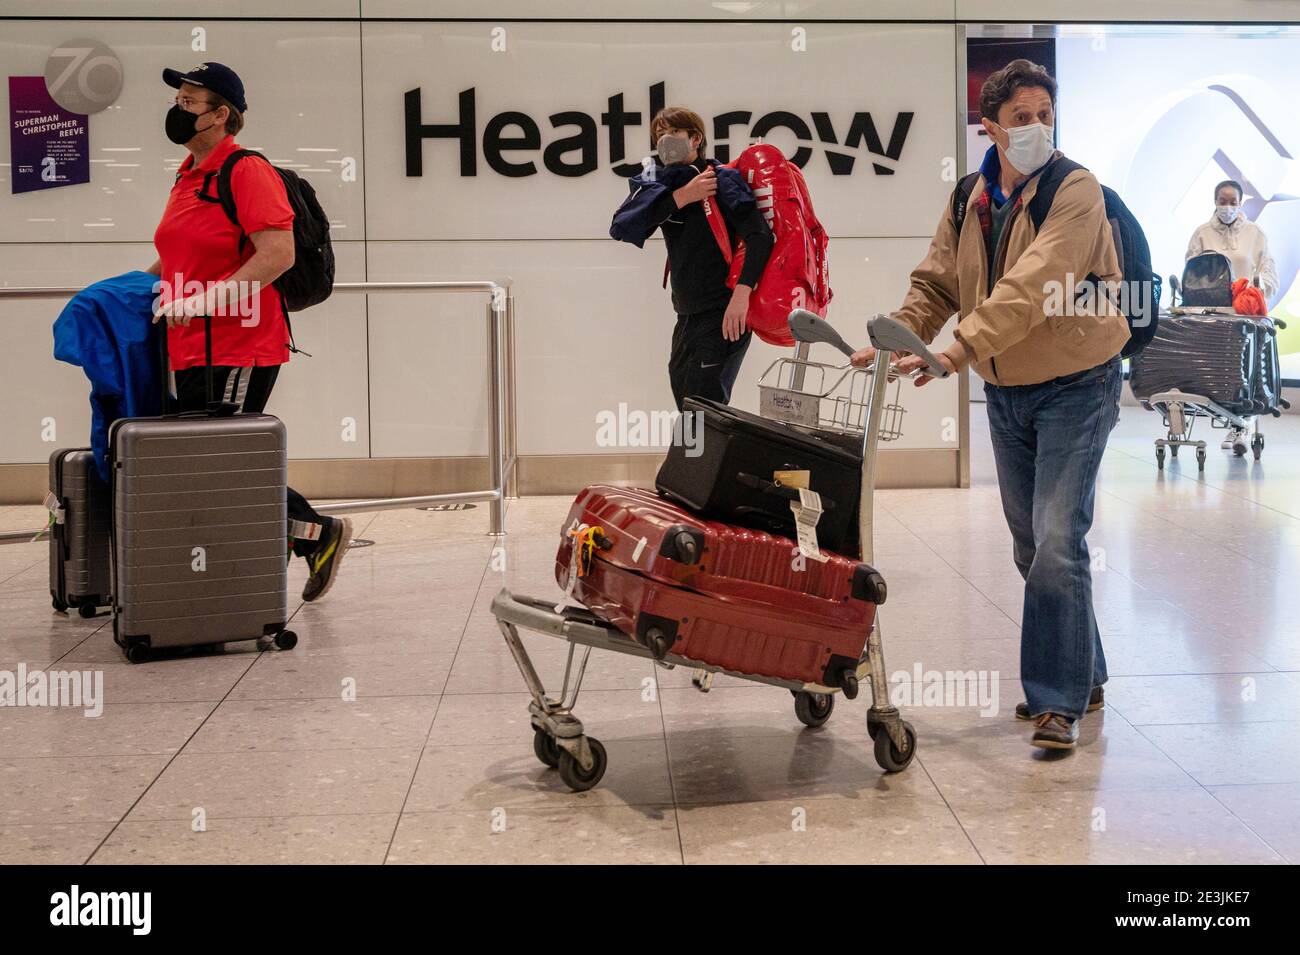 19 January 2021. Travellers in the international arrival area of Heathrow Airport near London. Travel corridors in the the UK were closed at 04:00 hours on 18 January 2021 as British government declared. Travellers arriving to England from anywhere outside the UK have to to self-isolate for 10 days and must have proof of a negative coronavirus test. Photo by Ray Tang Stock Photo